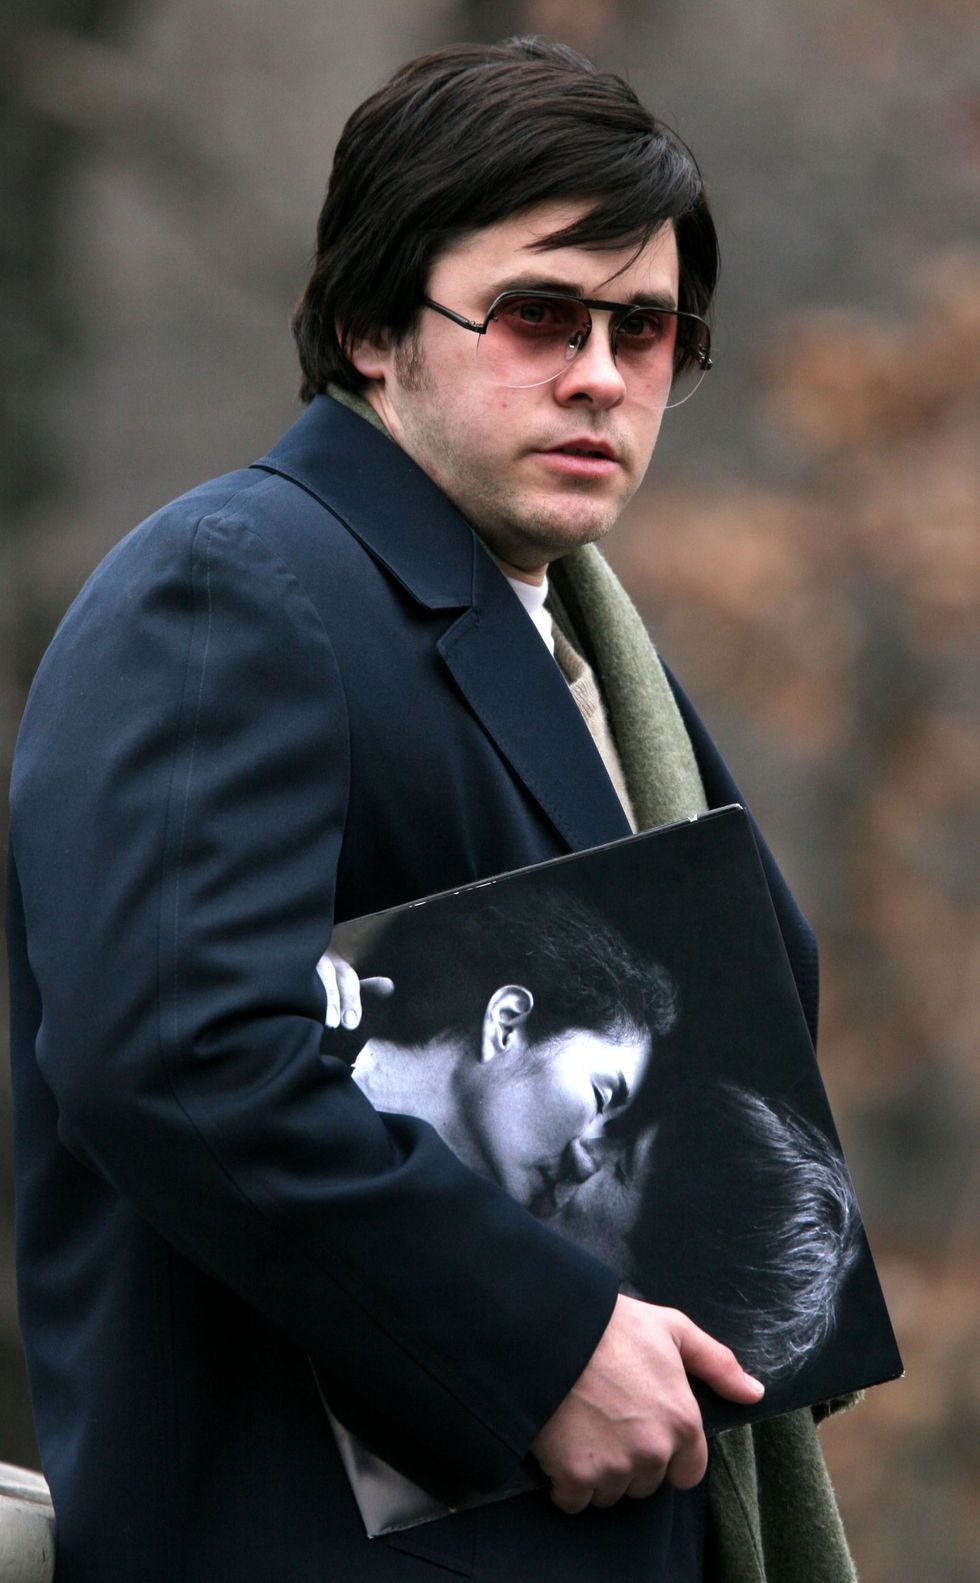 <p>While preparing to play Mark Chapman, the disturbed Beatles fan who assassinated John Lennon, Leto gained 62 pounds via the usual pizza and pasta gut-busters, as well as <a href="http://www.ew.com/article/2007/01/10/jared-leto-rock-star-role-lifetime">melted pints of Häagen-Dazs ice cream</a> mixed with olive oil and soy sauce for maximum bloat. While Leto's role was praised in an otherwise forgettable film, it came at a cost-including being in a wheelchair for the pain. As <a href="https://www.theguardian.com/film/2014/feb/01/jared-leto-dallas-buyers-club">he told the<i> Guardian</i></a>, "Really, it's a stupid thing to do. I got gout, and my cholesterol went up so fast in such a short time that my doctors wanted to put me on Lipitor, which is for much, much older people. Again, though, a fascinating journey."<span></span><br></p>